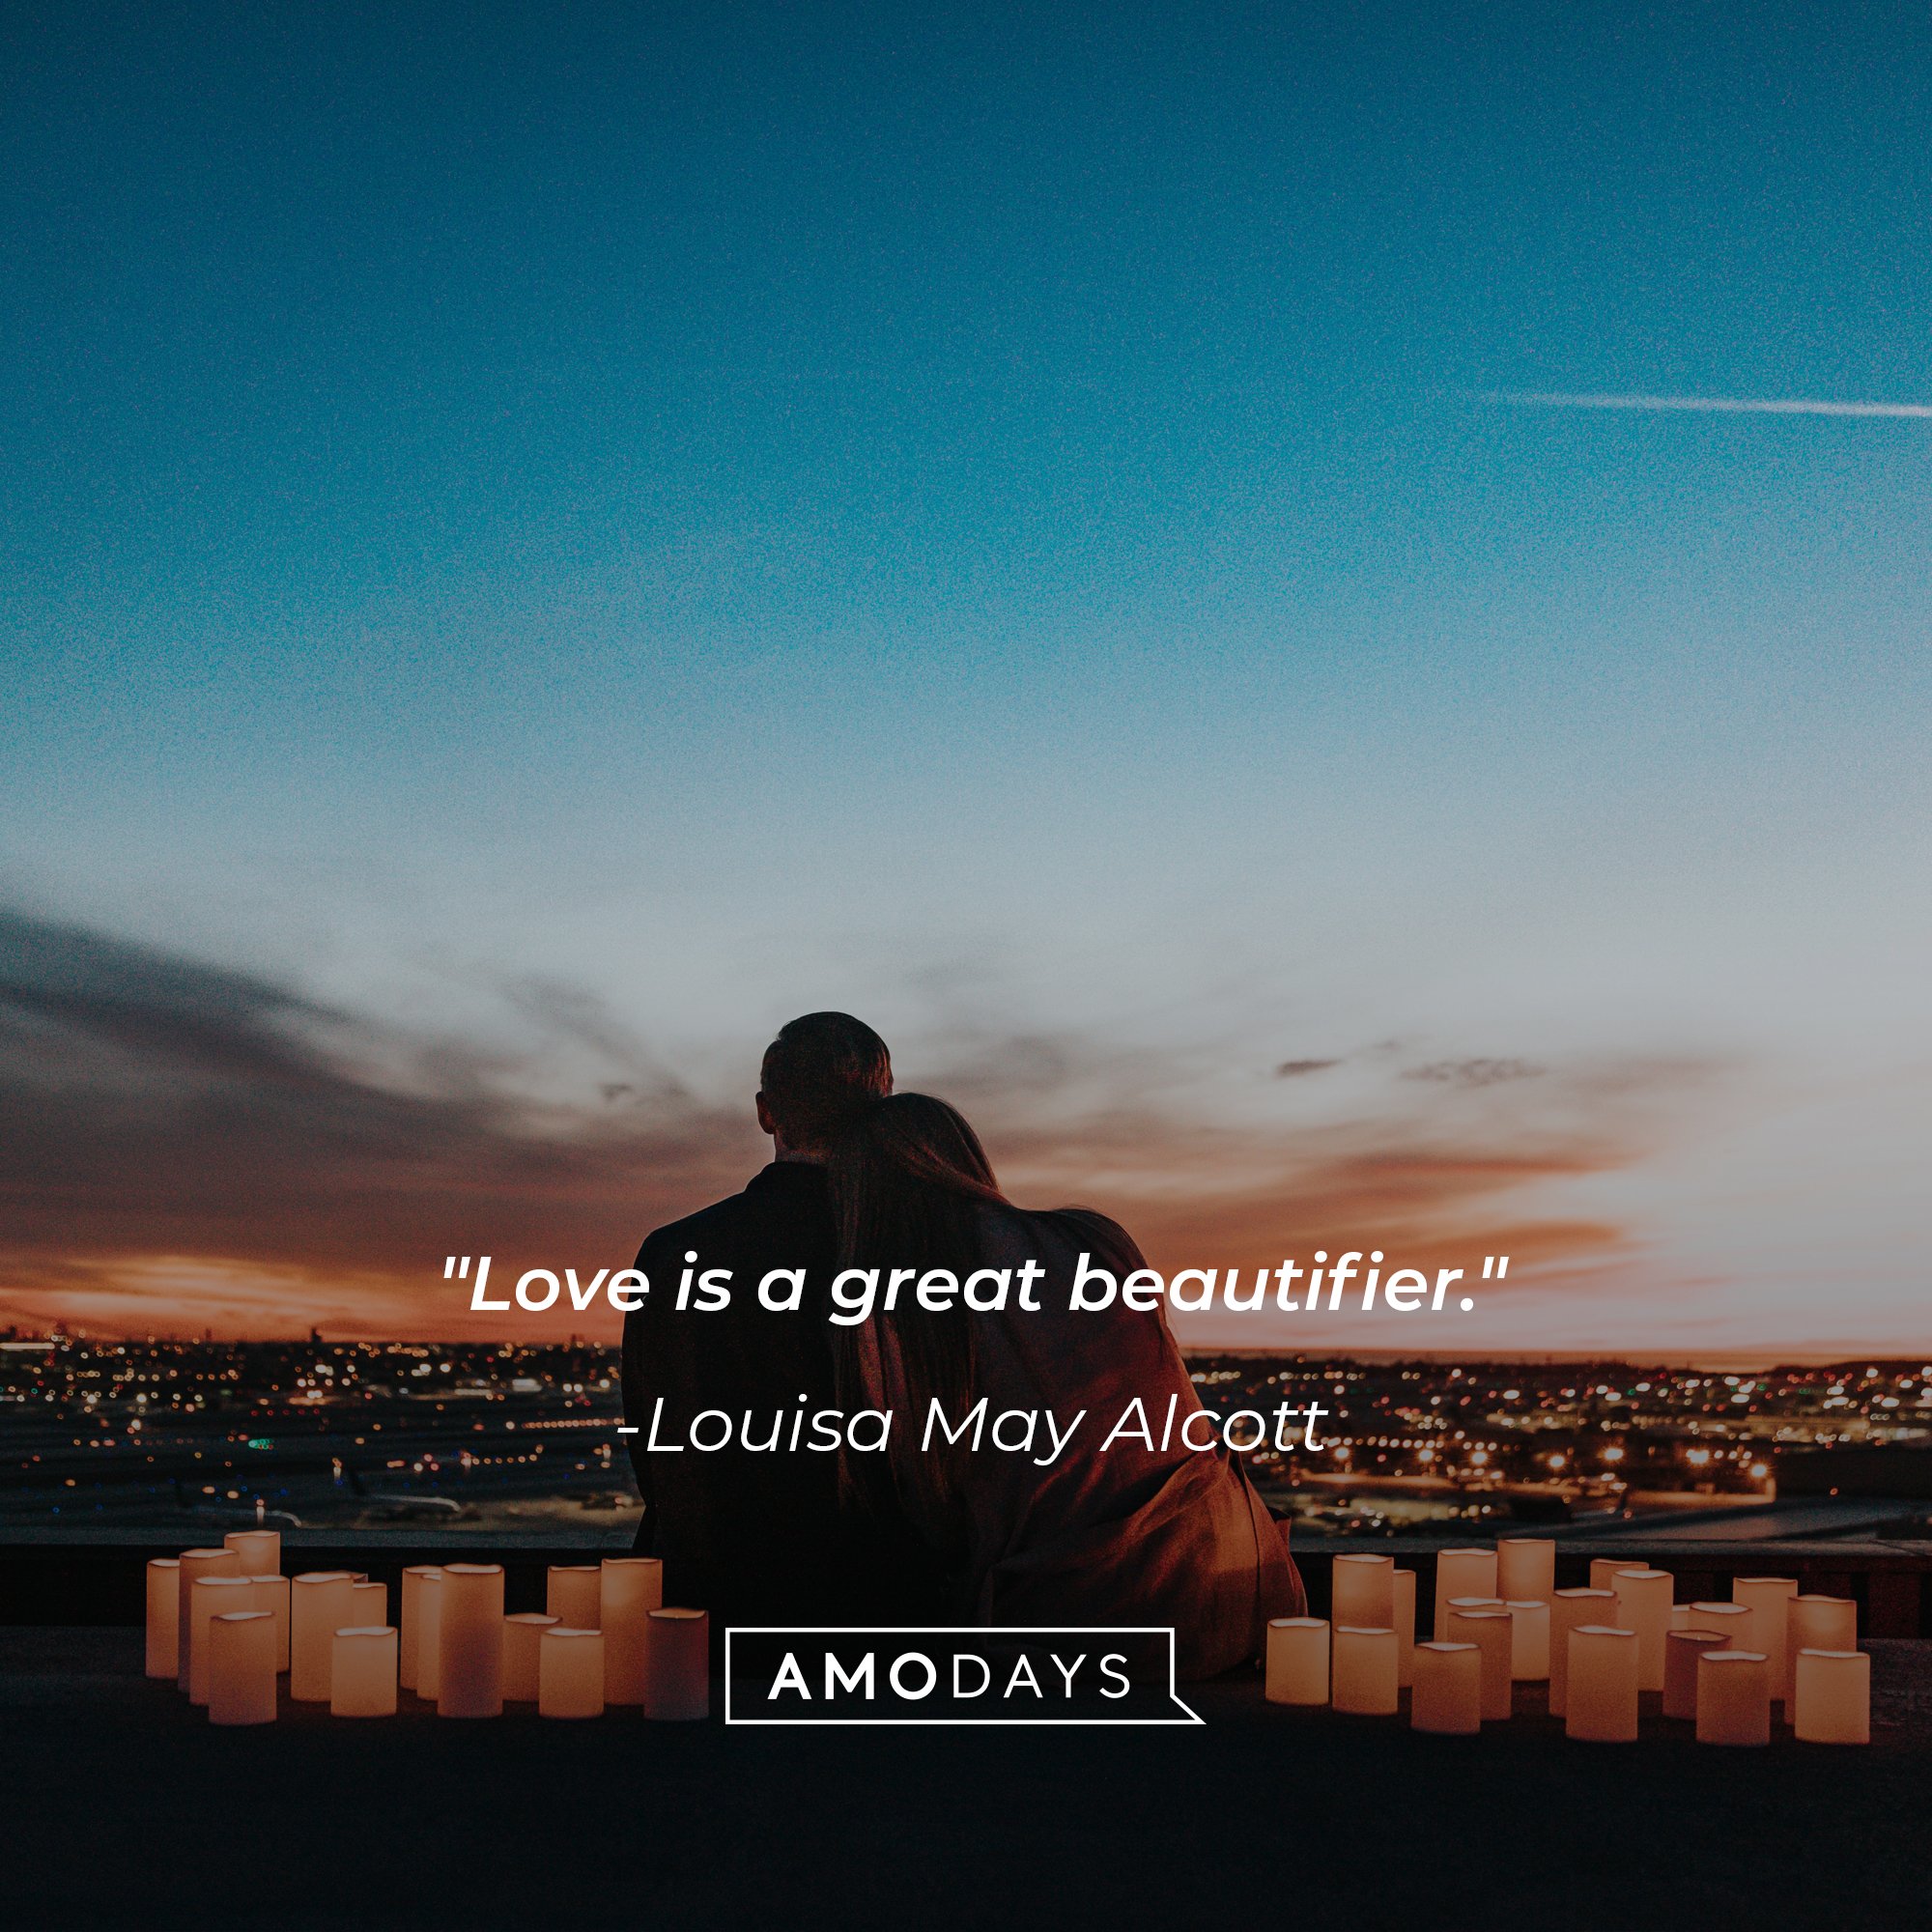 Louisa May Alcott’s quote: "Love is a great beautifier." | Image: AmoDays